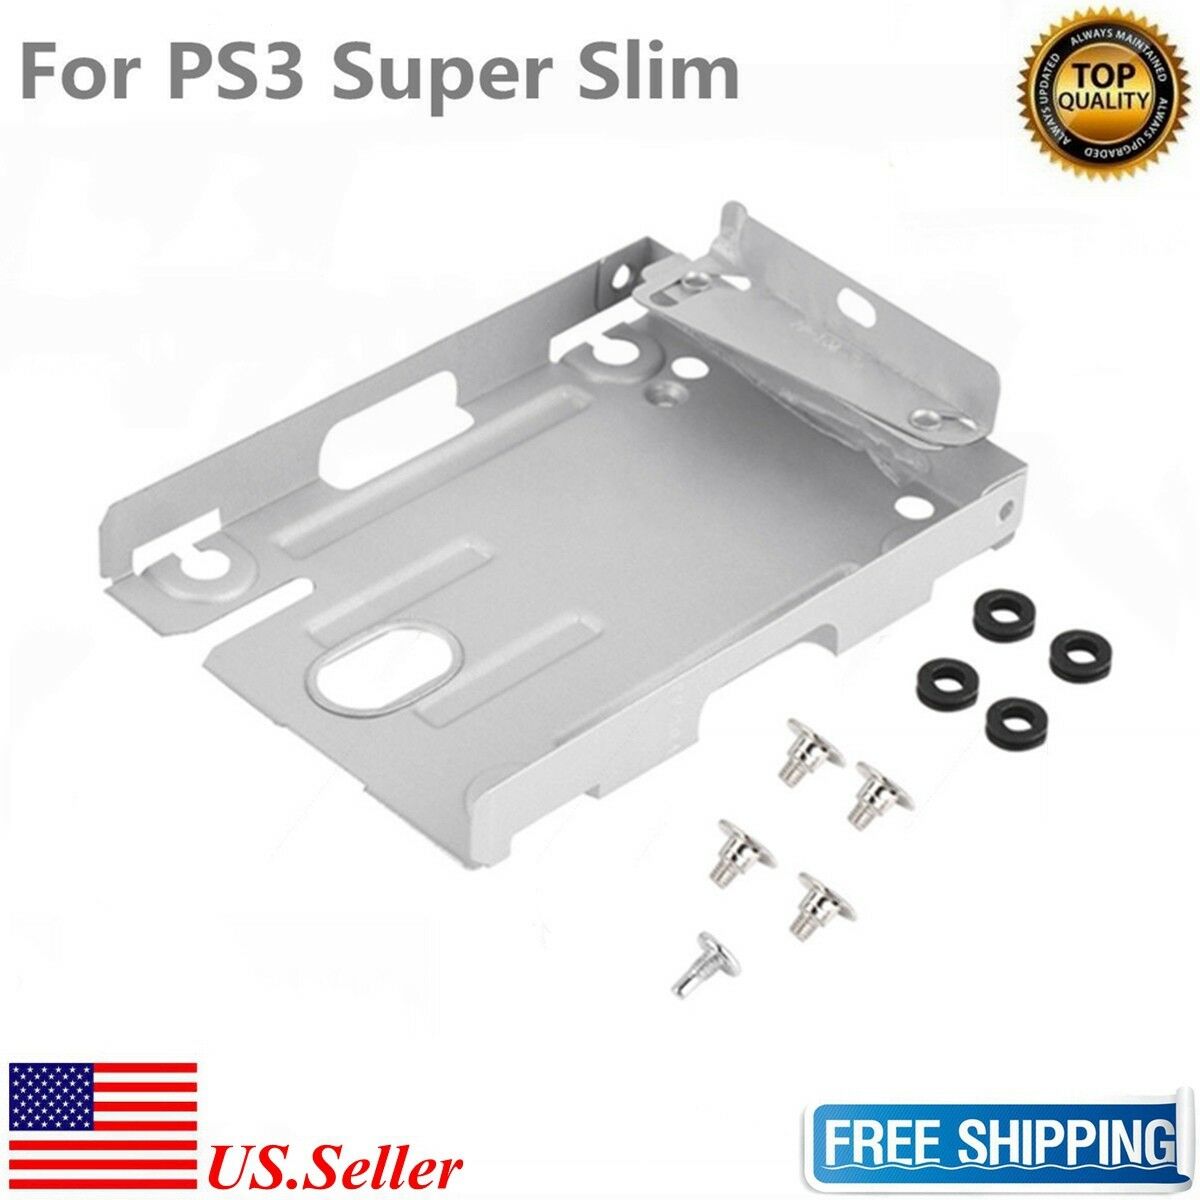 New Ps3 Super Slim 4000 Hdd Consoles Hard Disk Drive Mounting Bracket Caddy